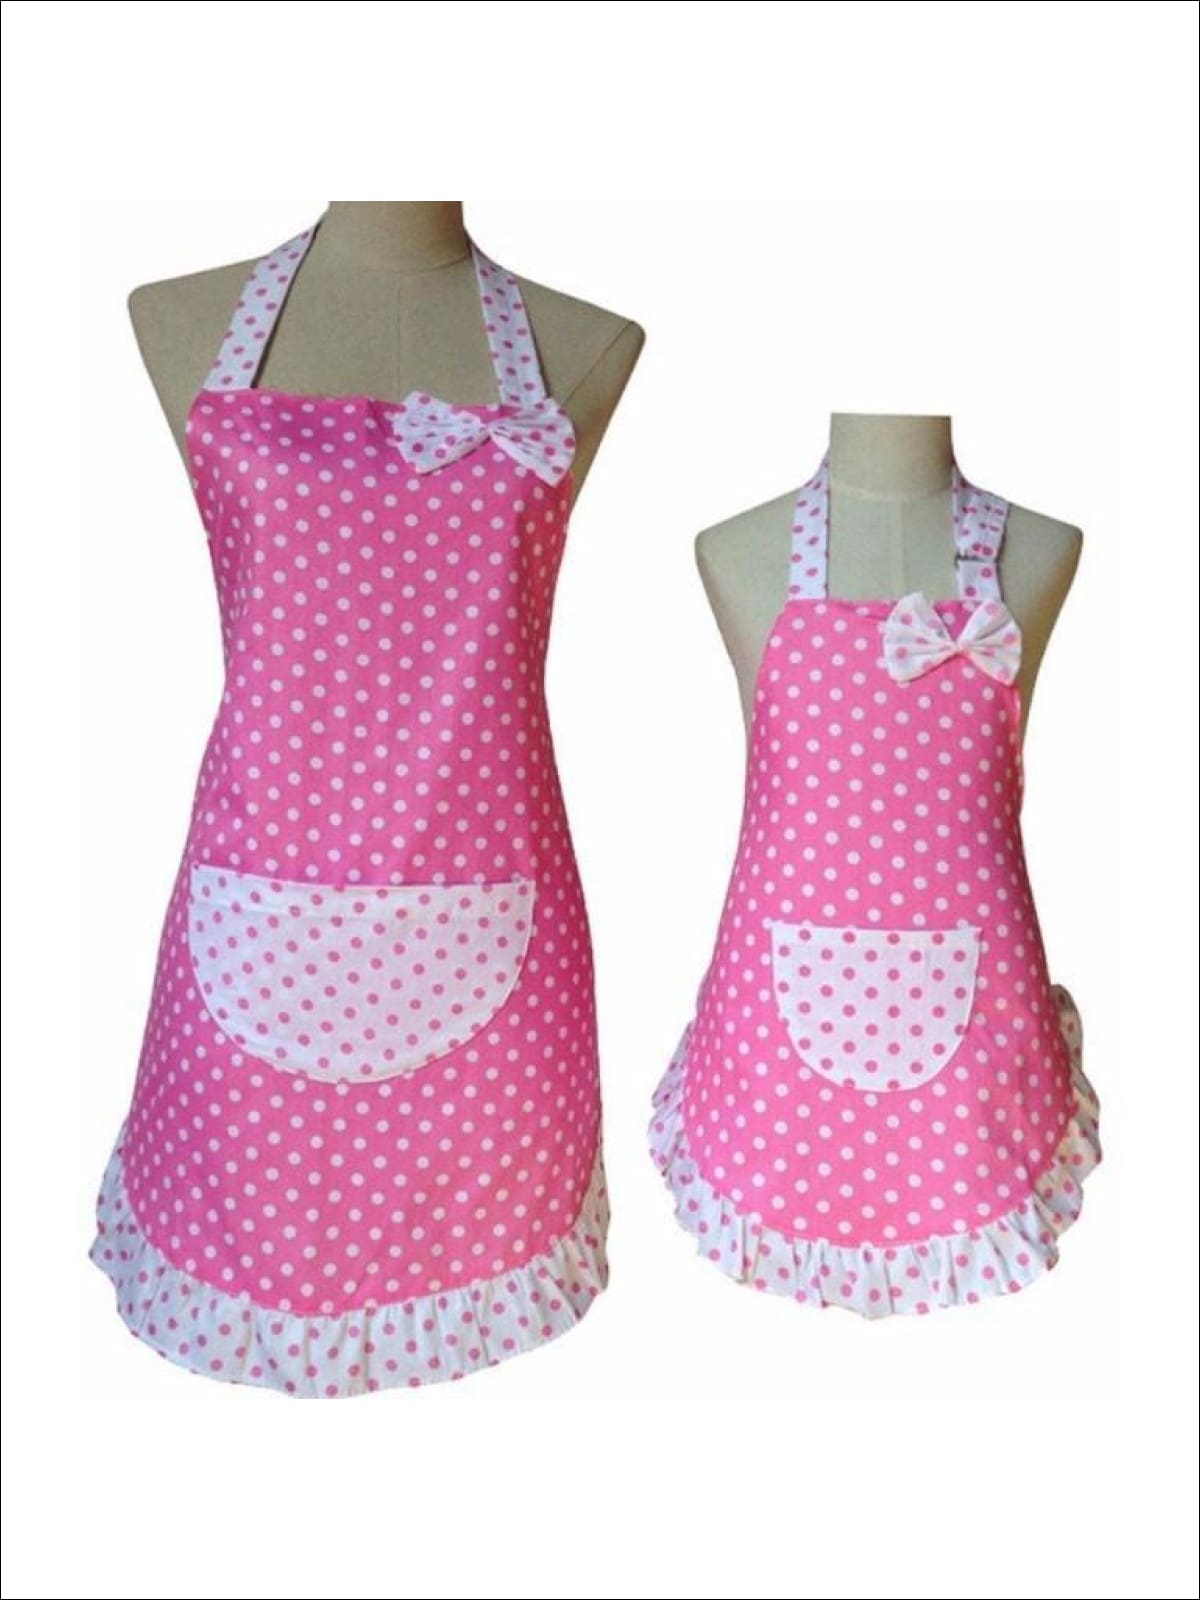 https://cdn.shopify.com/s/files/1/0996/1812/products/pink-polka-dot-mommy-me-apron-set-one-size-20-39-99-afterchristmas-bfcutoff-cf-type-mia-belle-overseas-fulfillment-baby_209.jpg